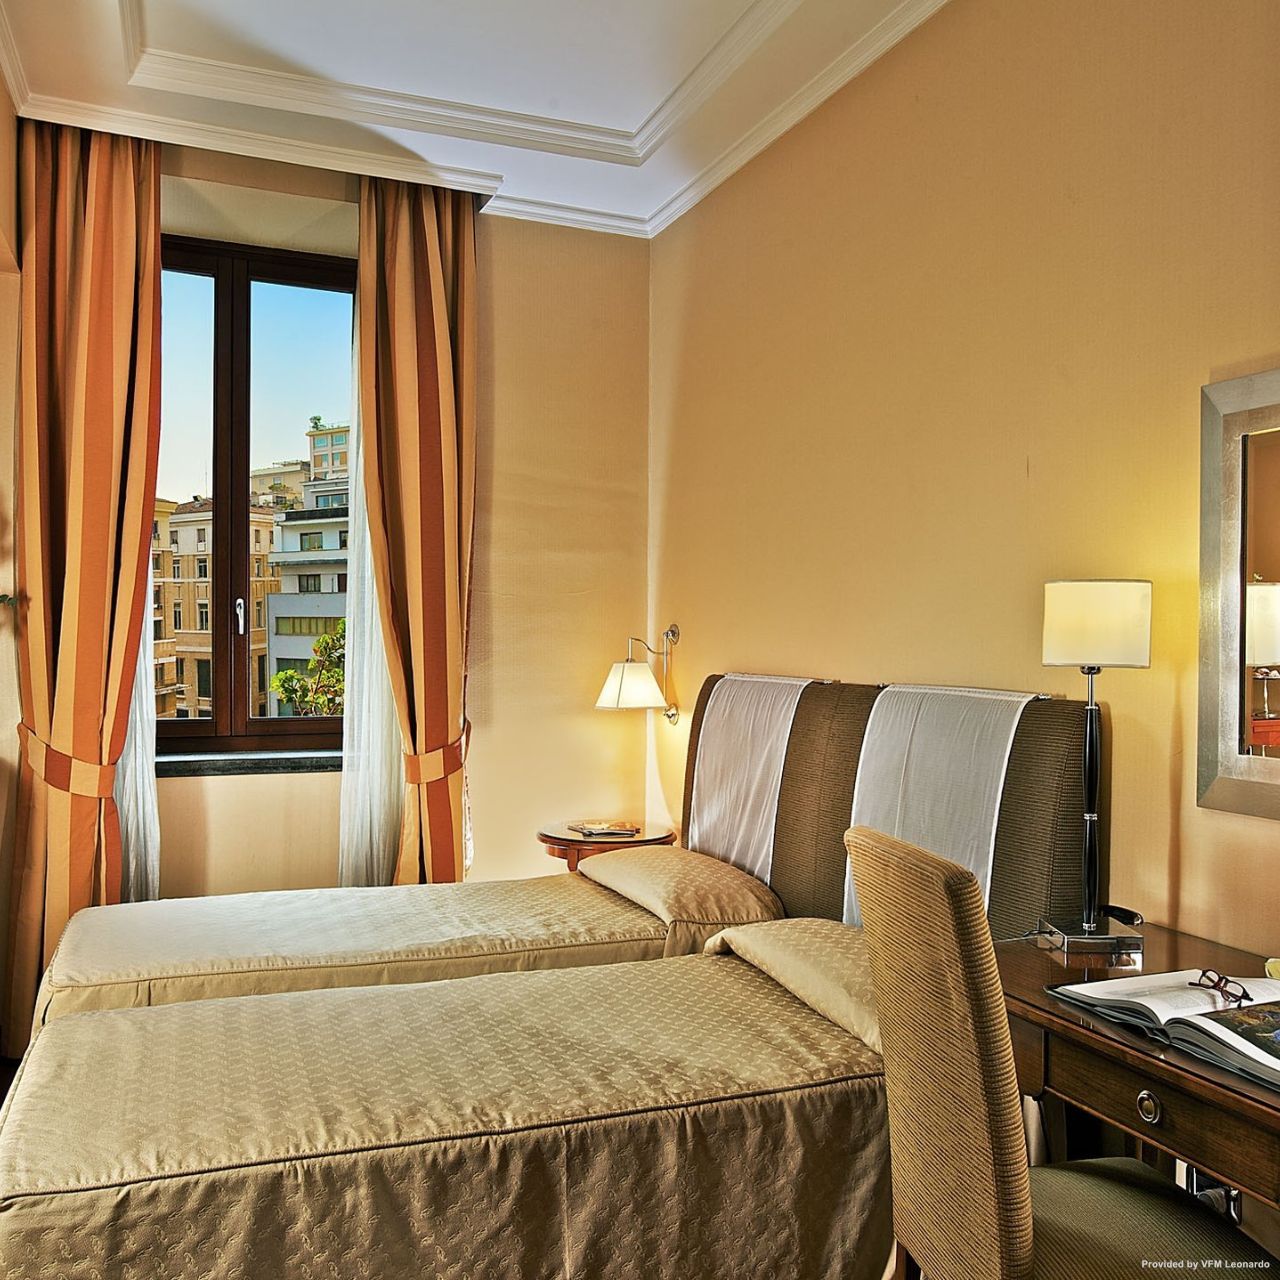 Hotel Palazzo Turchini - Naples - Great prices at HOTEL INFO